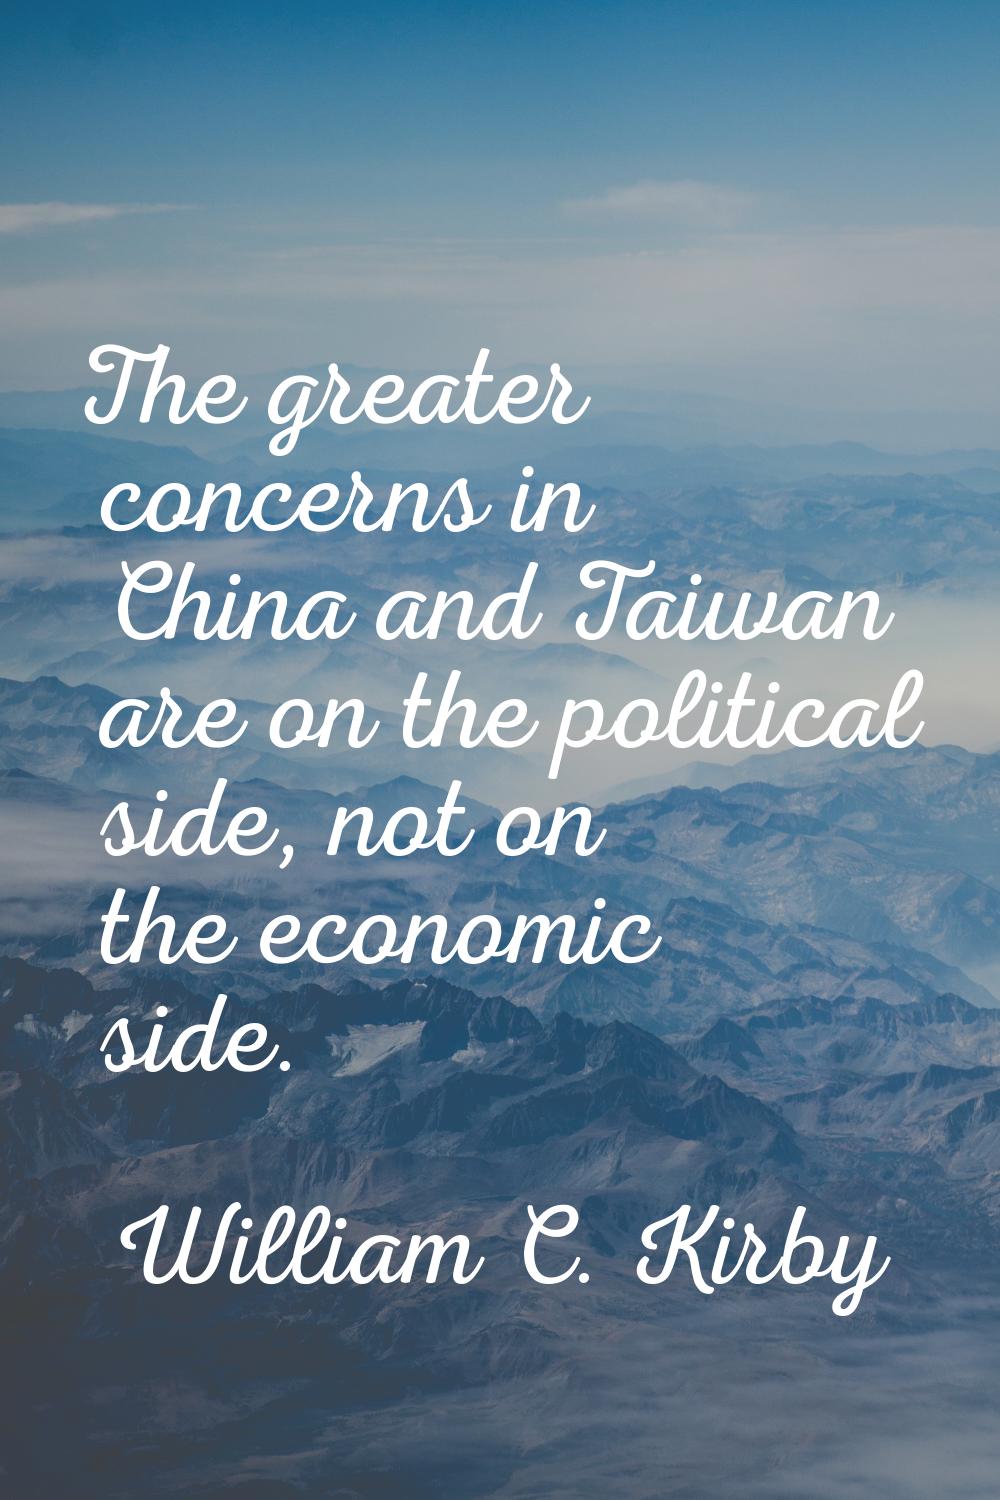 The greater concerns in China and Taiwan are on the political side, not on the economic side.